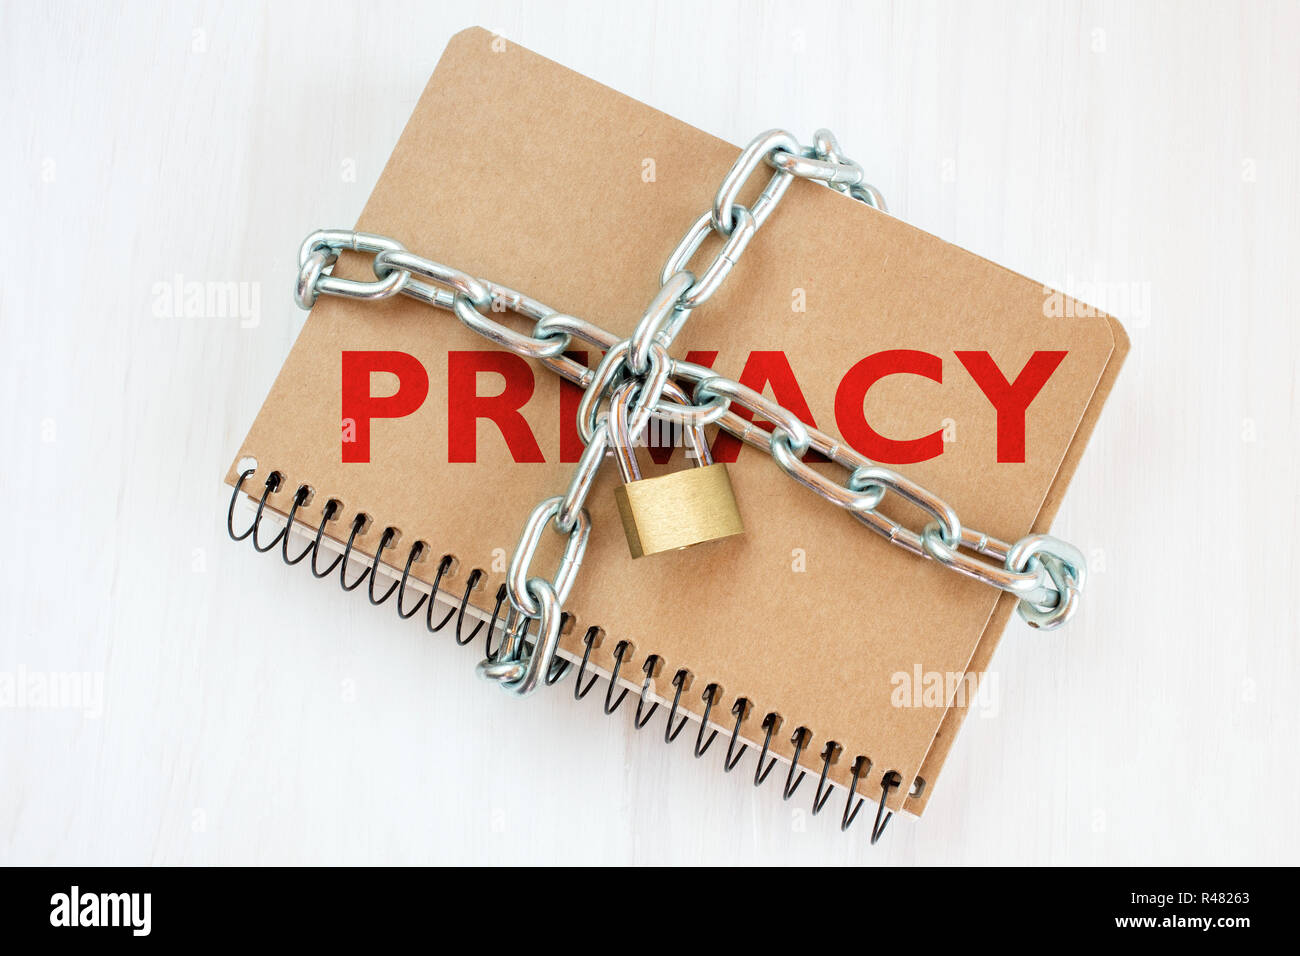 Privacy protection concept Stock Photo